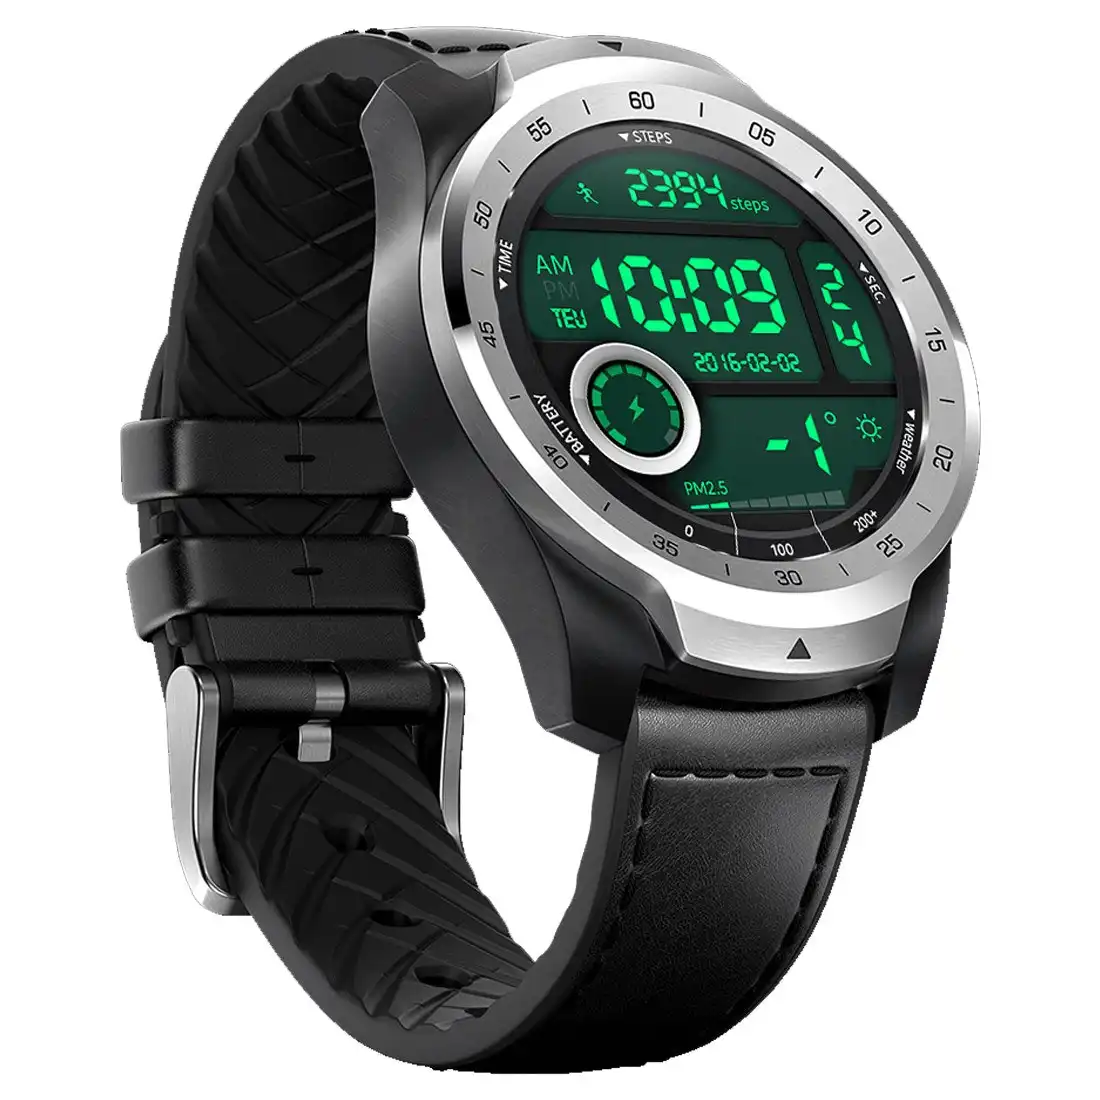 TicWatch Pro (G Pay, Wear OS by Google) - Silver